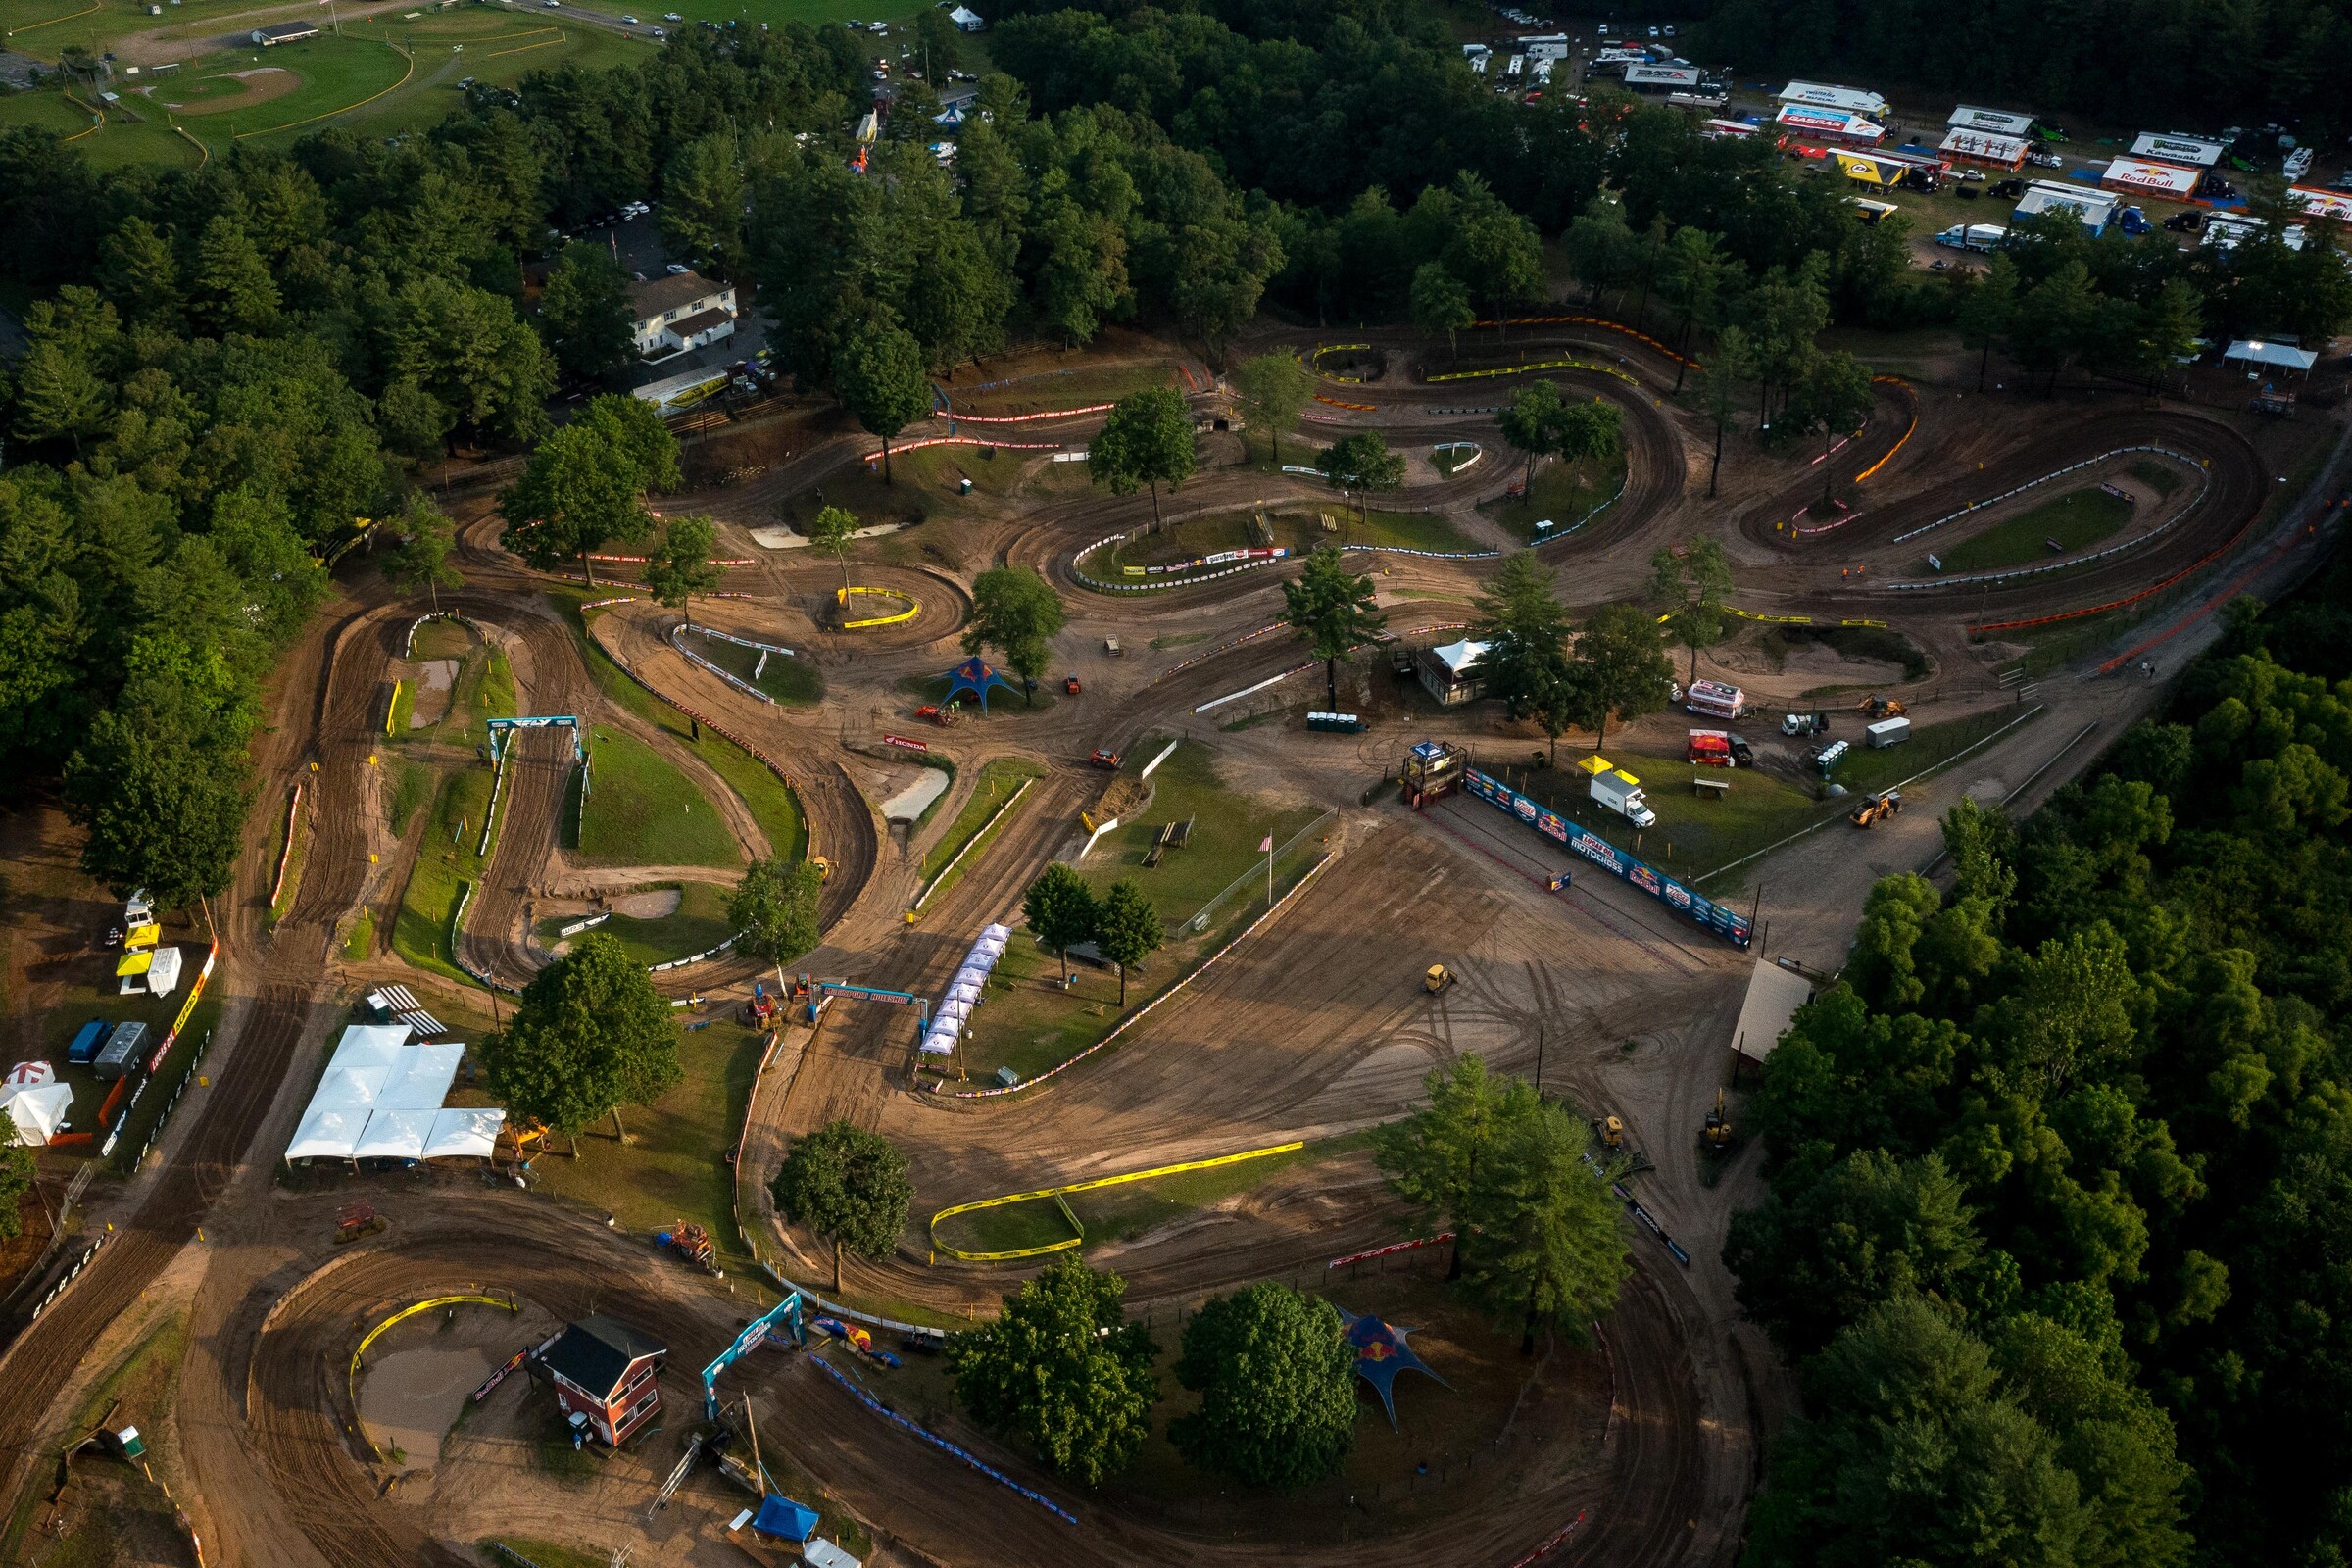 Jason Thomas' Preview of the 2022 Southwick National Racer X